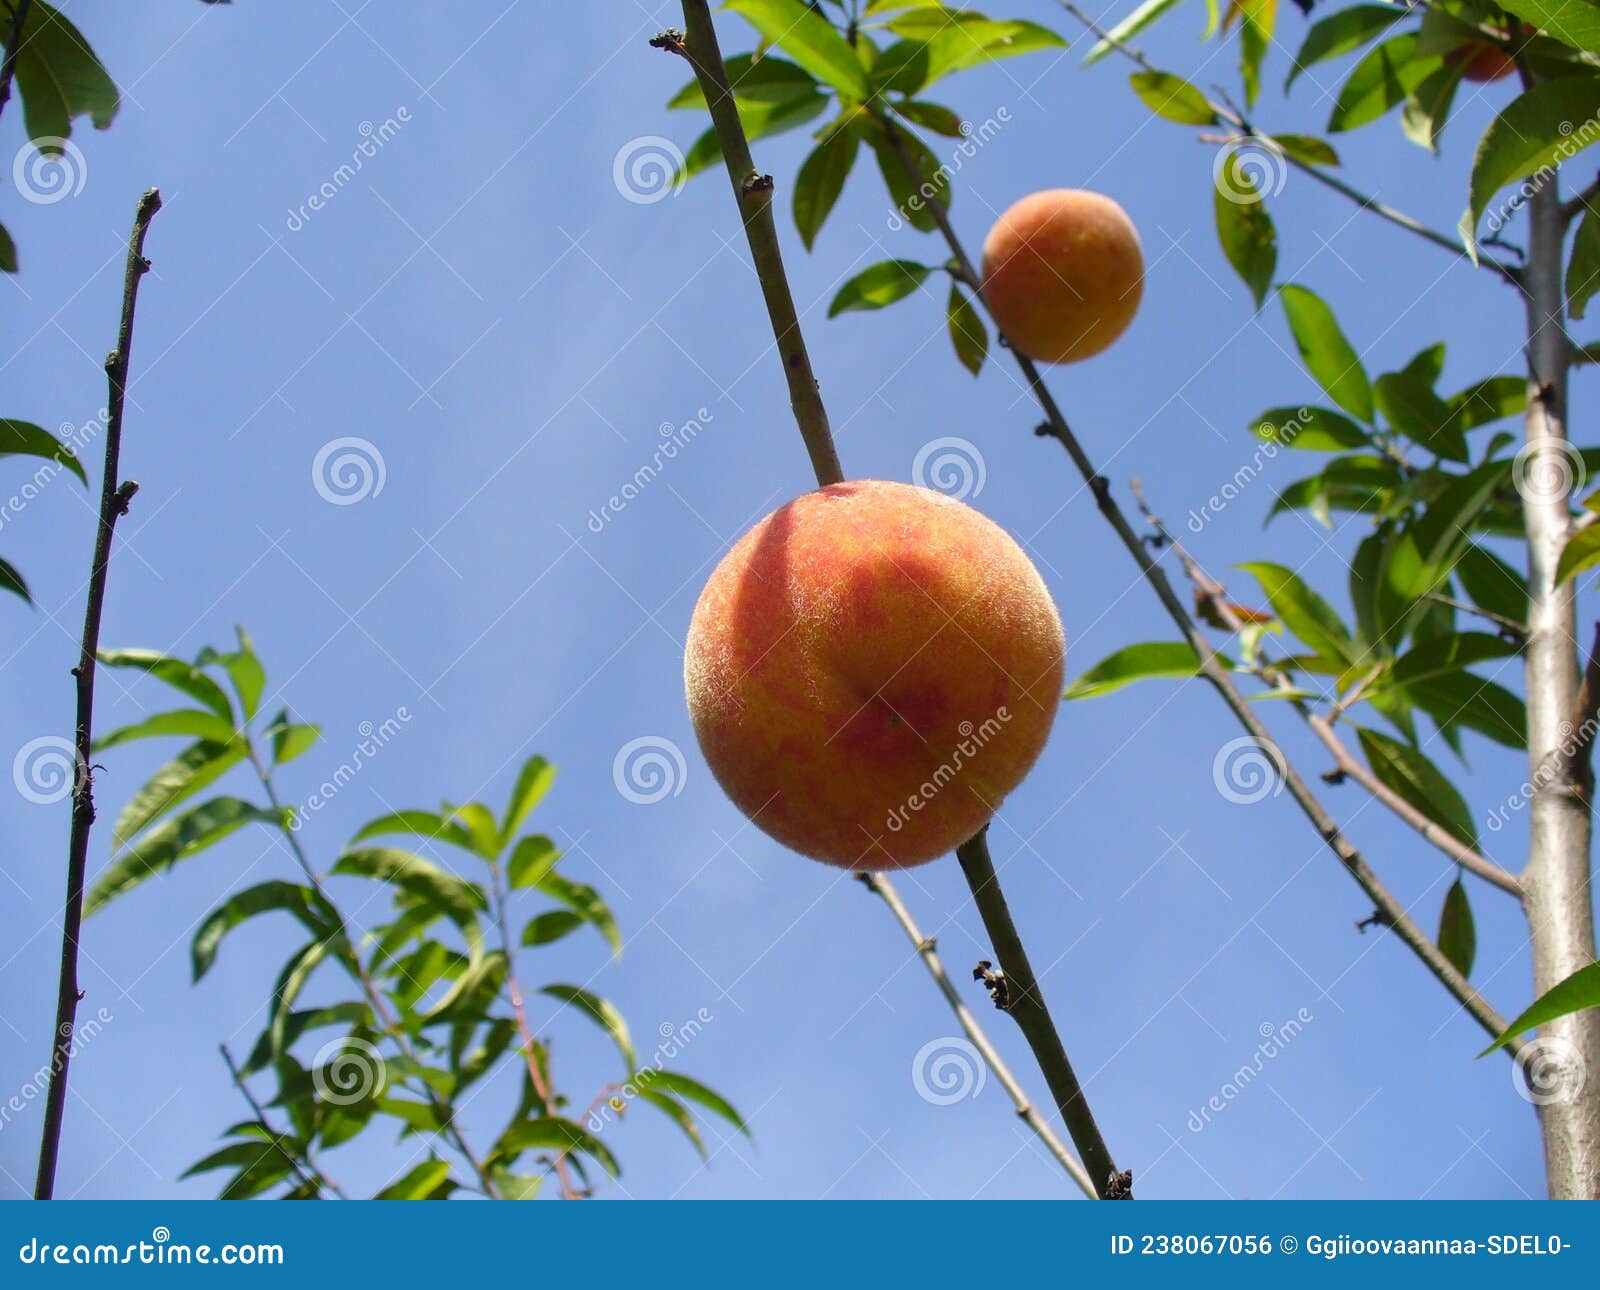 Colorful Naturally Sun Ripened Peach Fruits On Tree Against Sunny Sky